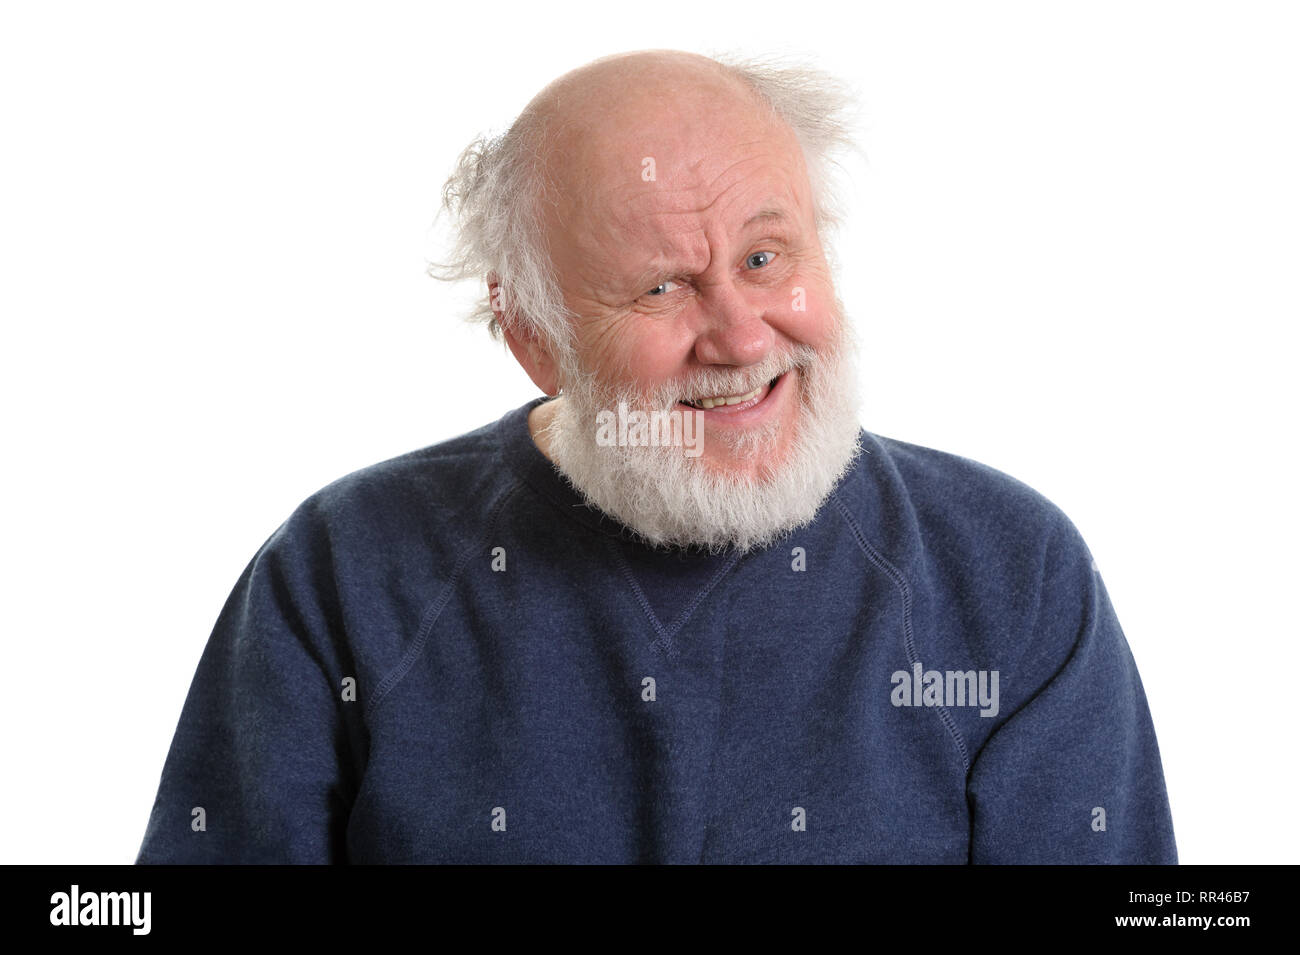 Portrait d'sarcasticly laughing man, isolated on white Banque D'Images